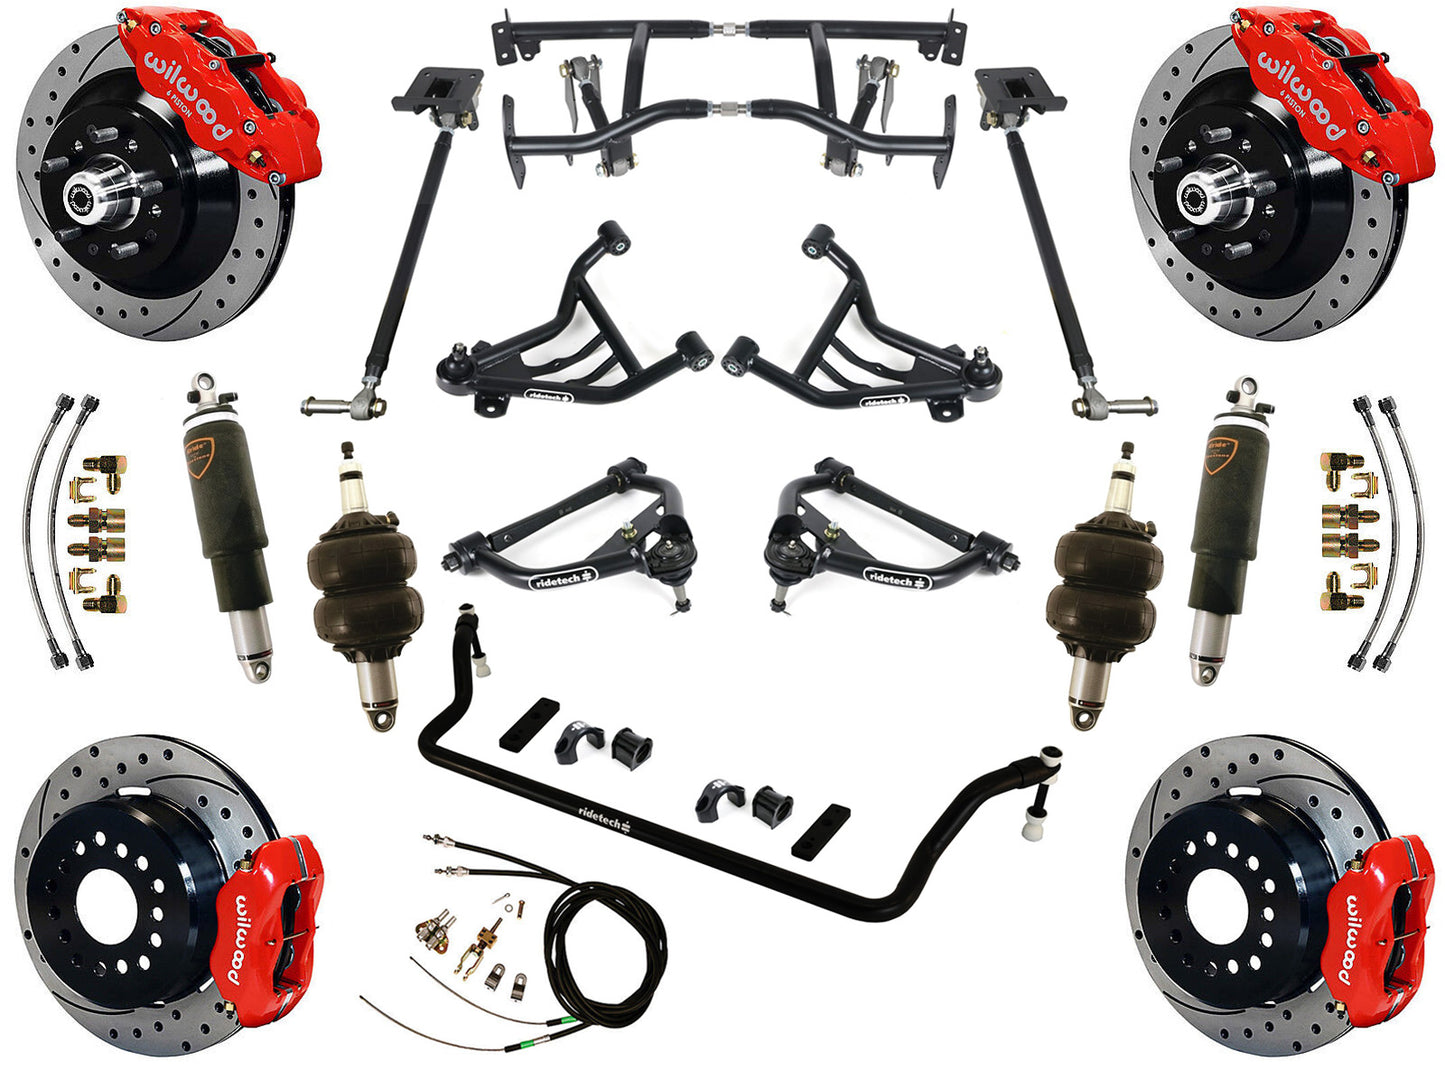 AIR RIDE & 4-LINK SYSTEM,WILWOOD 13"/12" DRILLED BRAKES,RED CALIPERS,70-81 GM F